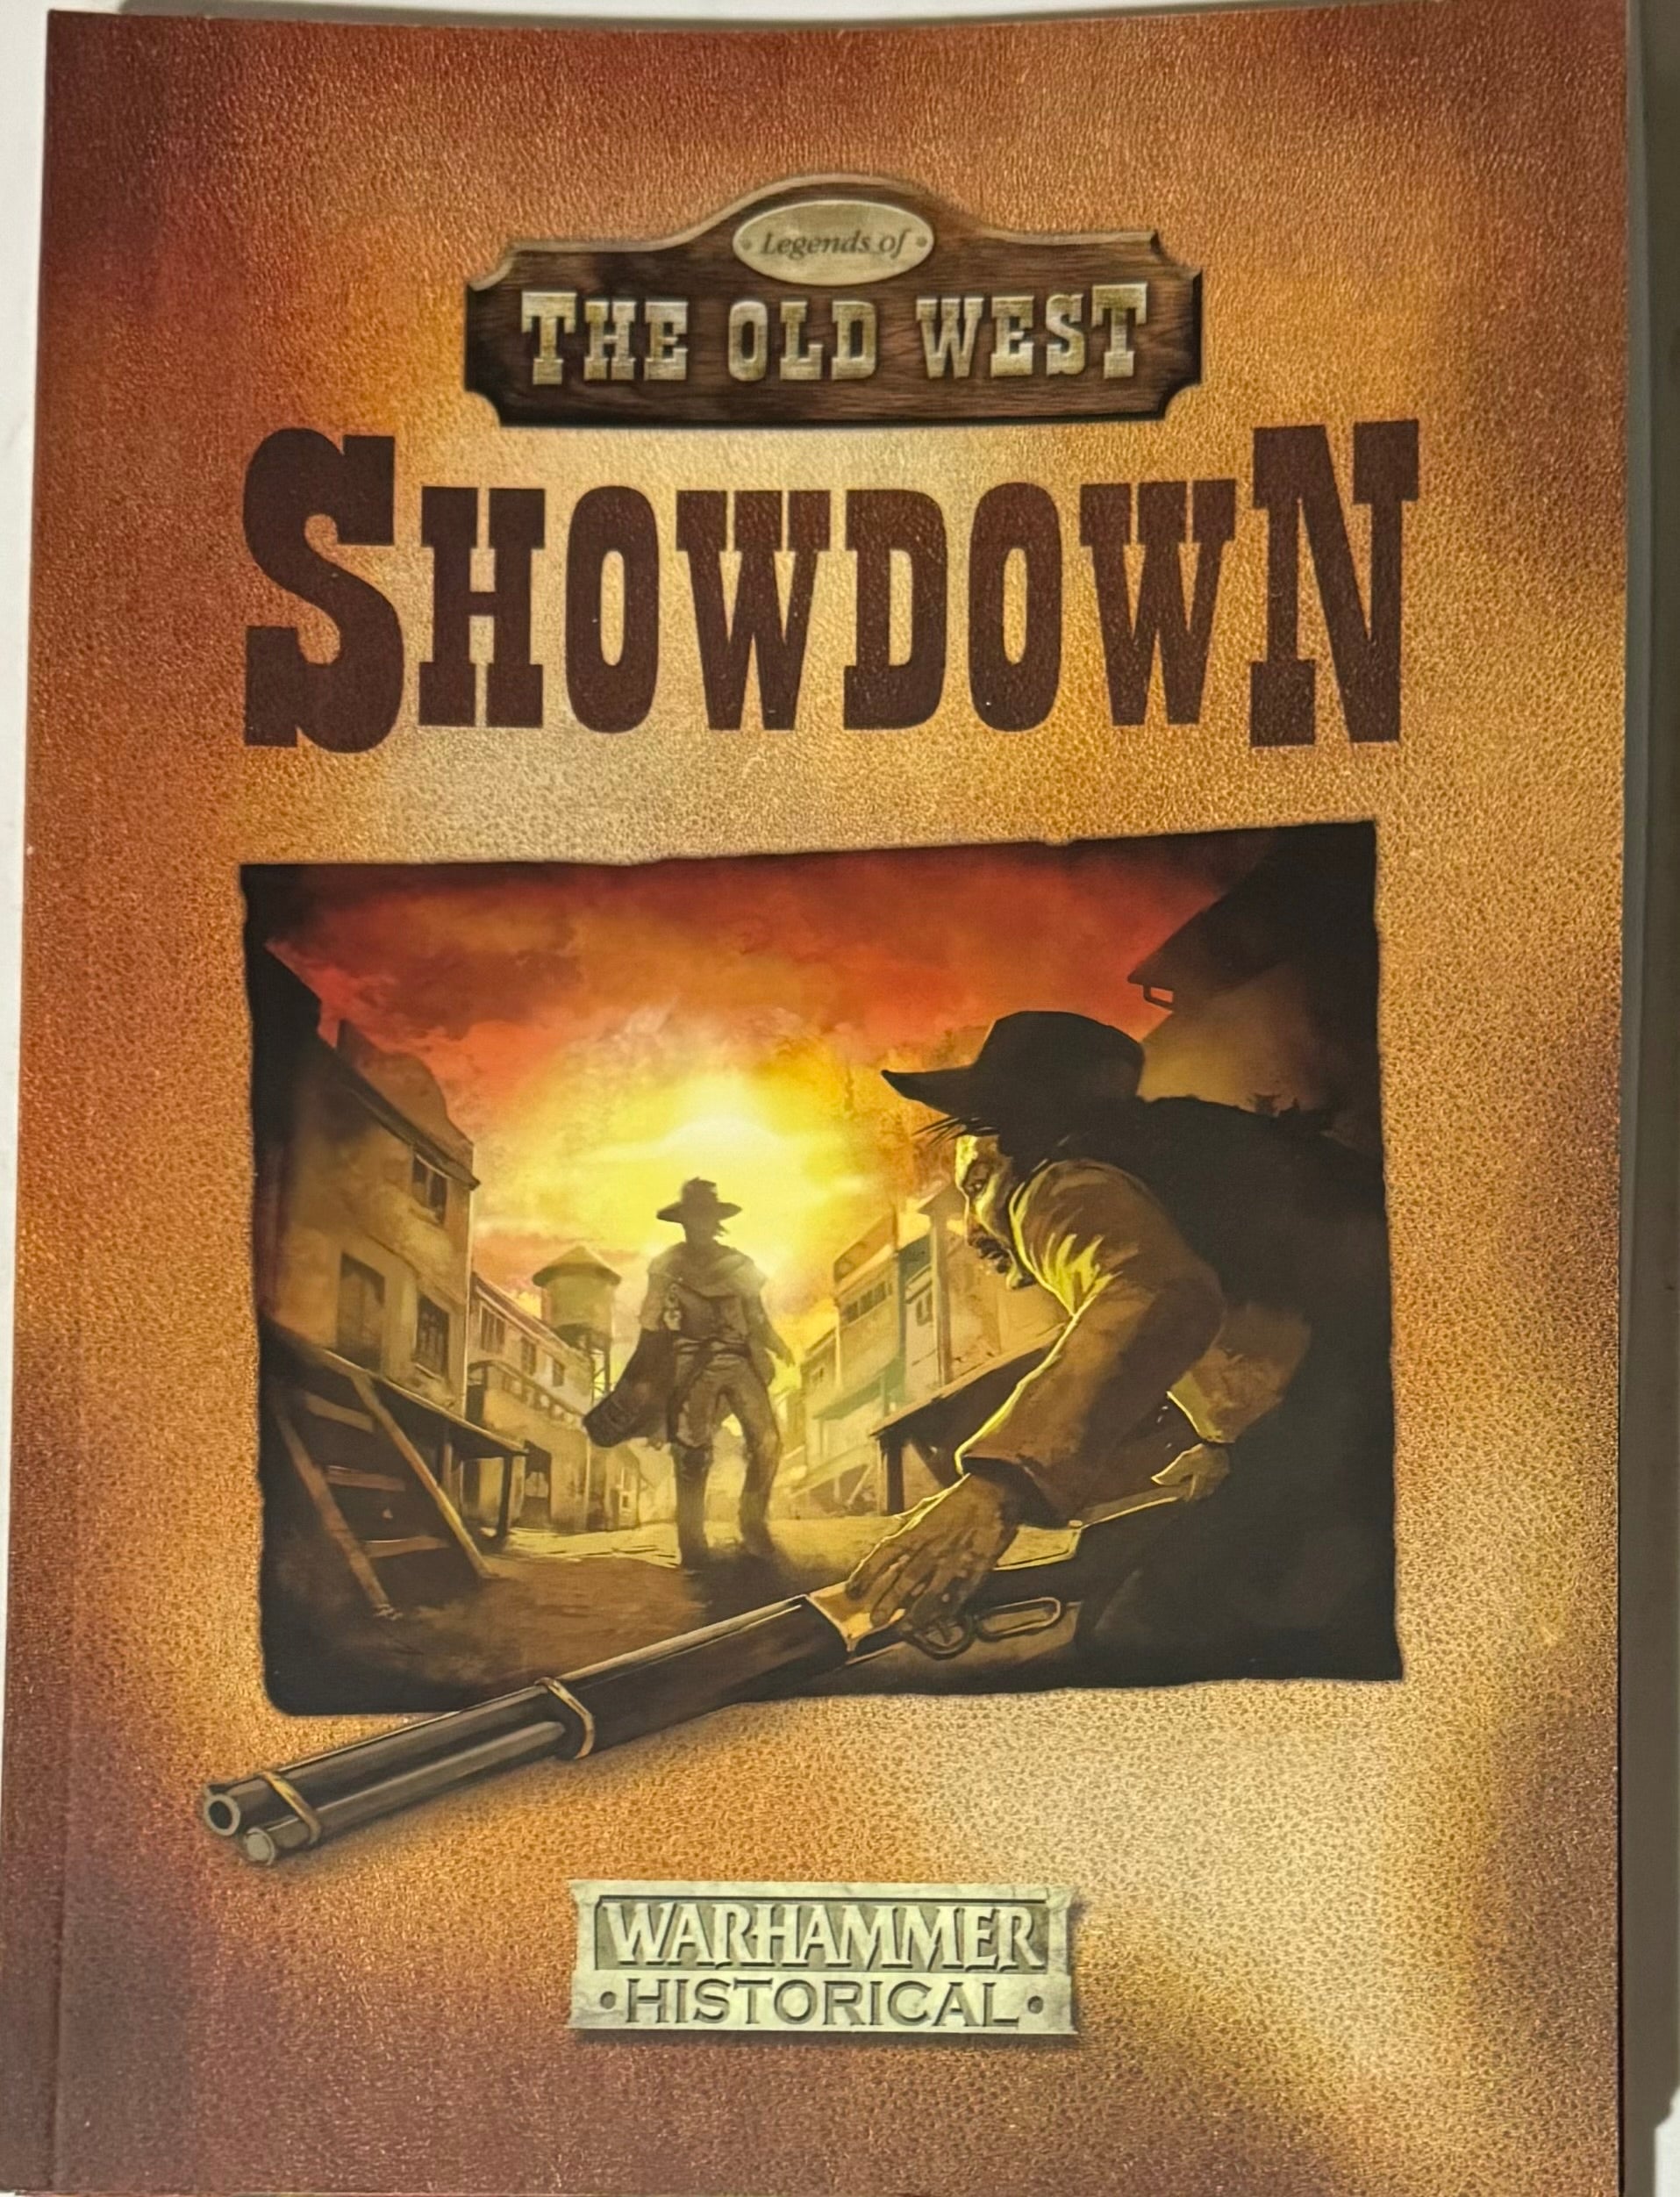 Showdown- Legends of the Old West supplement